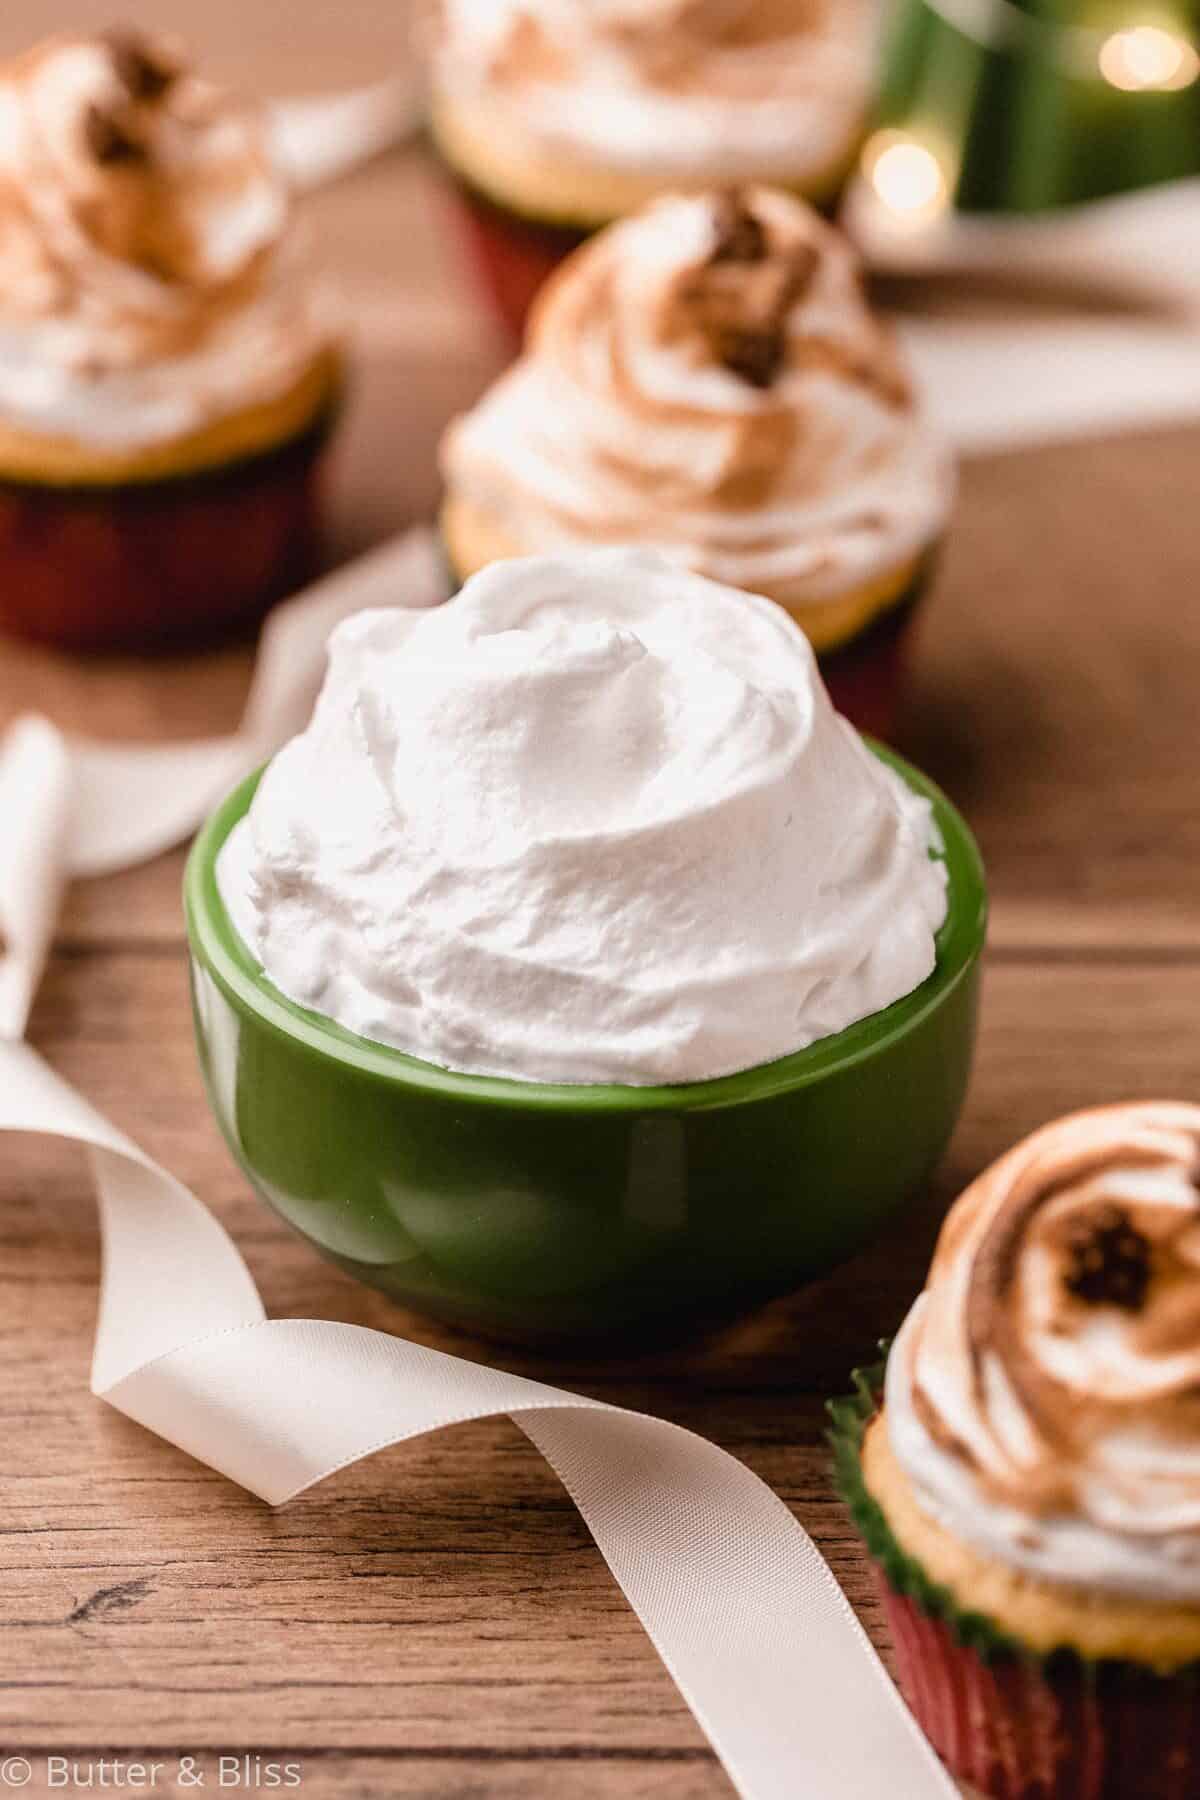 A bowl of marshmallow frosting set on a table.